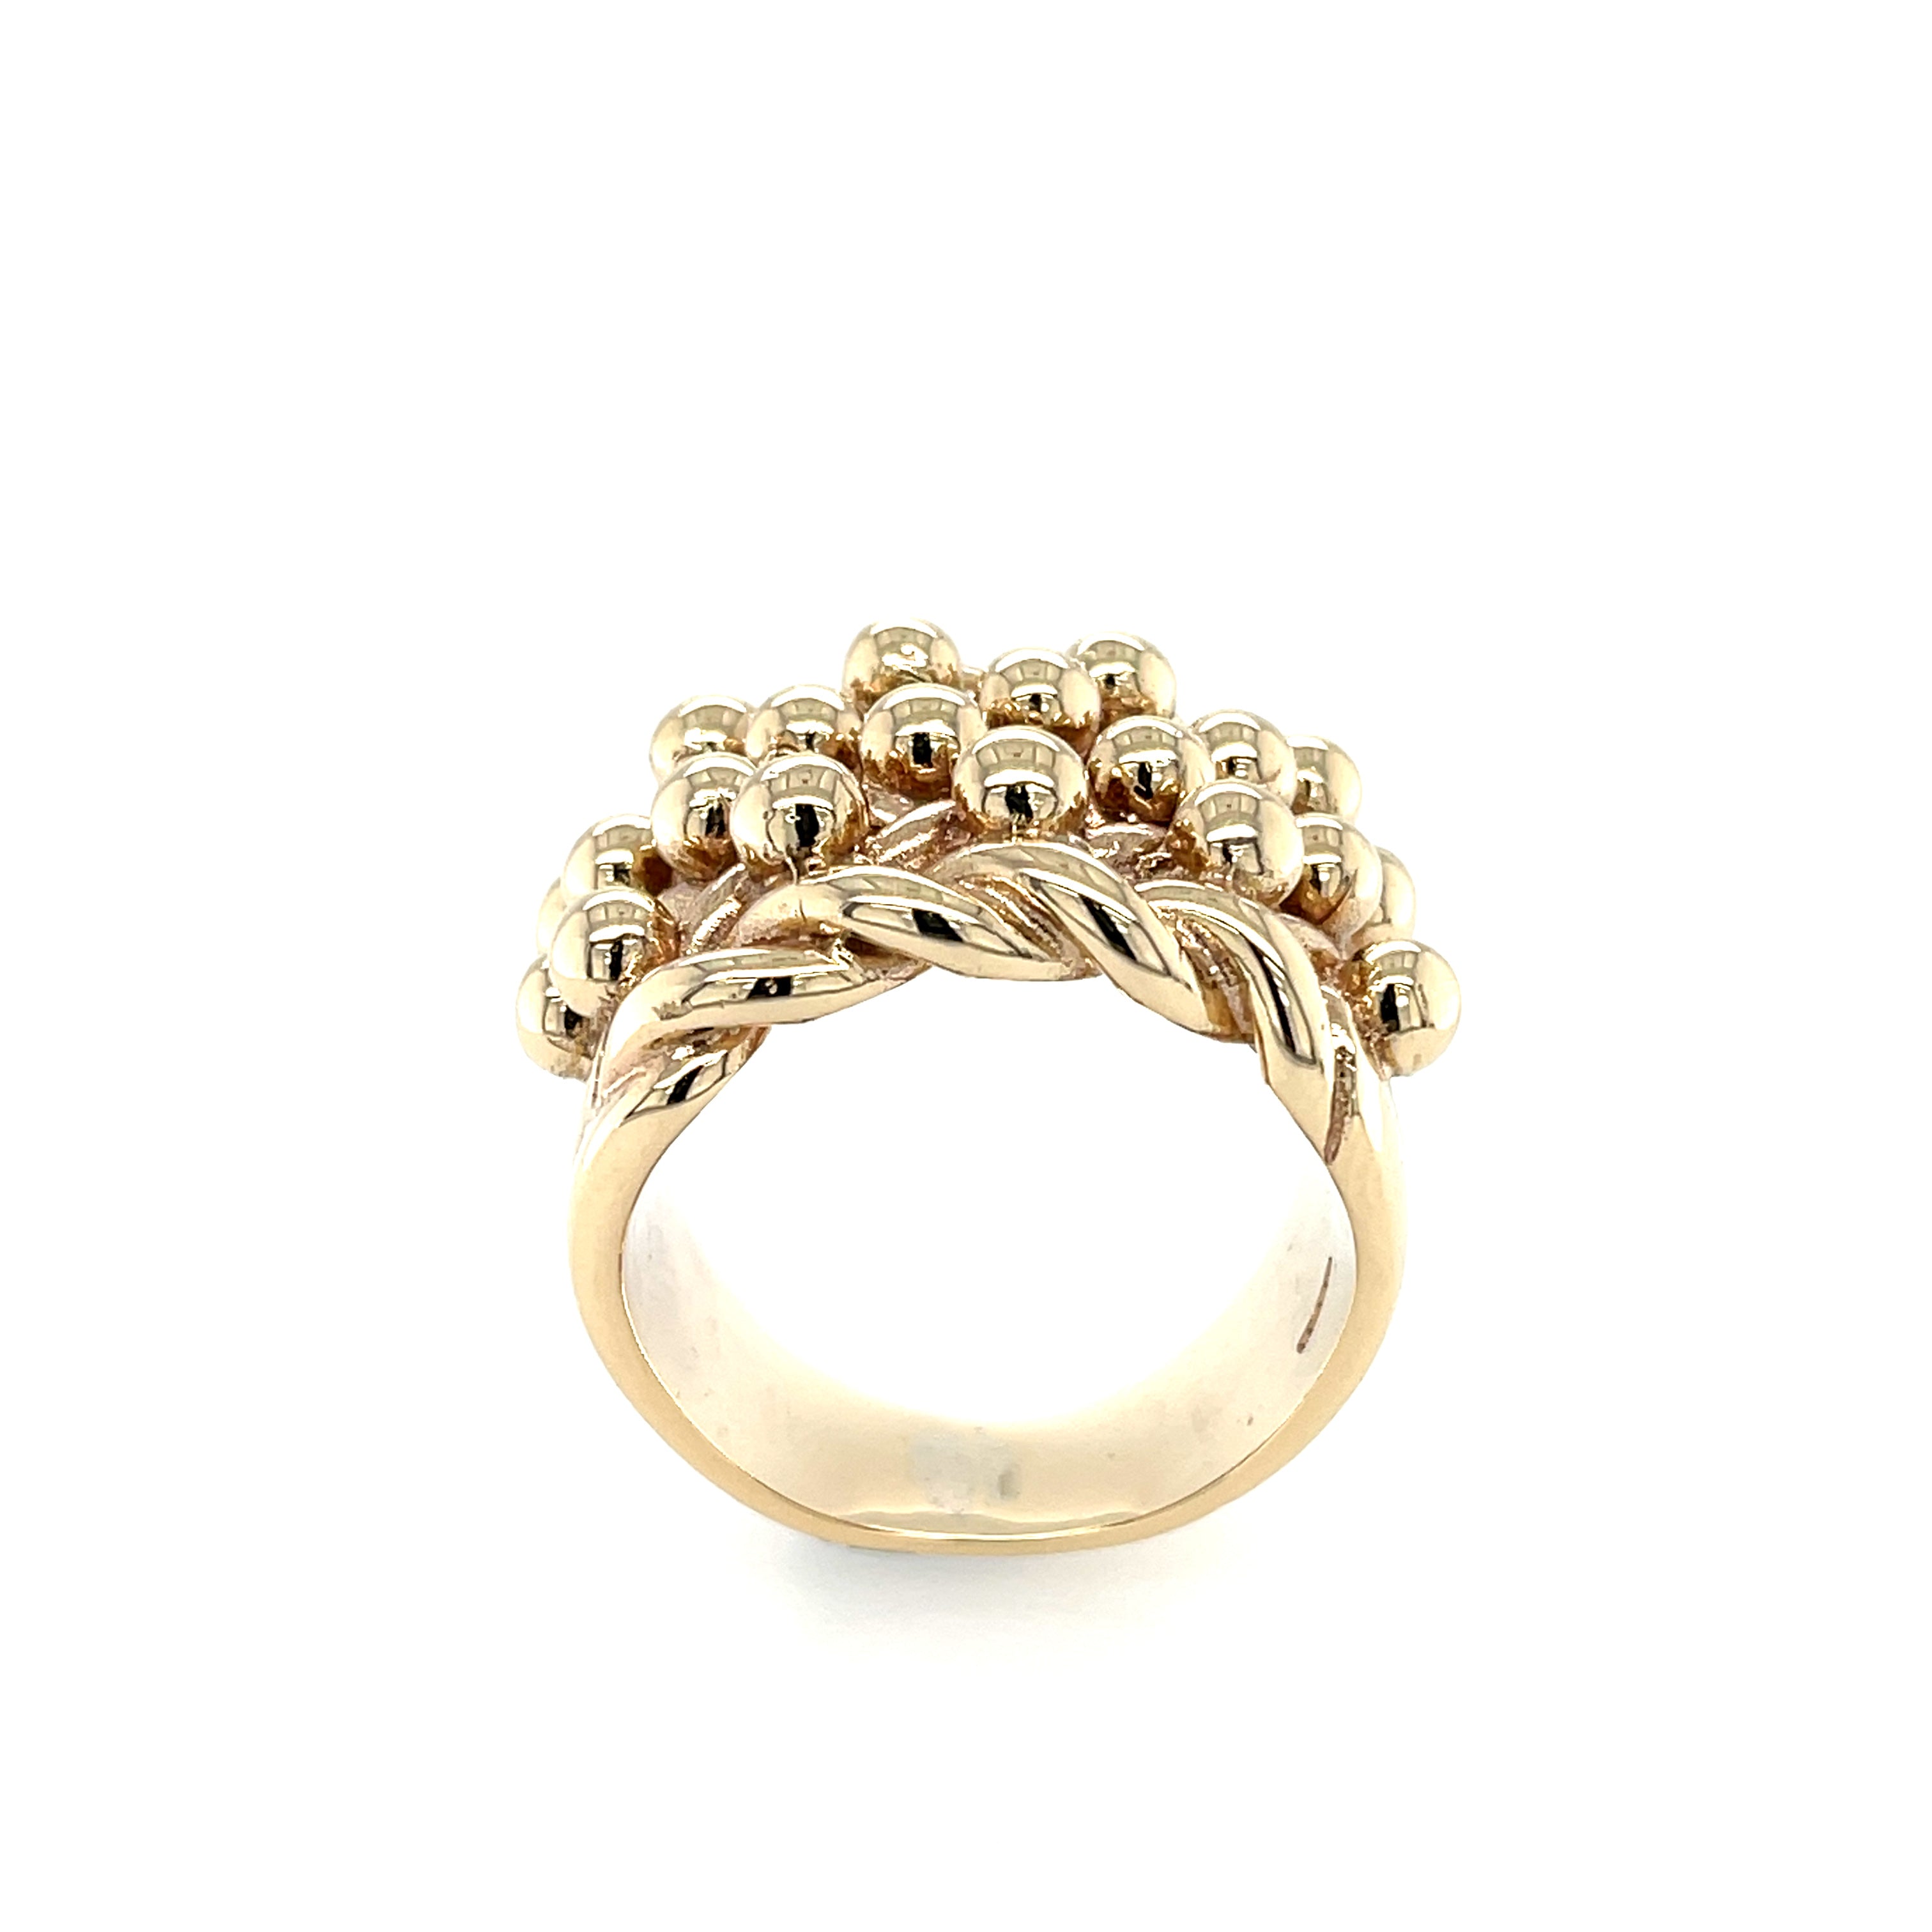 9ct Yellow Gold 4 Row Heavy Keeper Ring Size Z - 46.50g SOLD